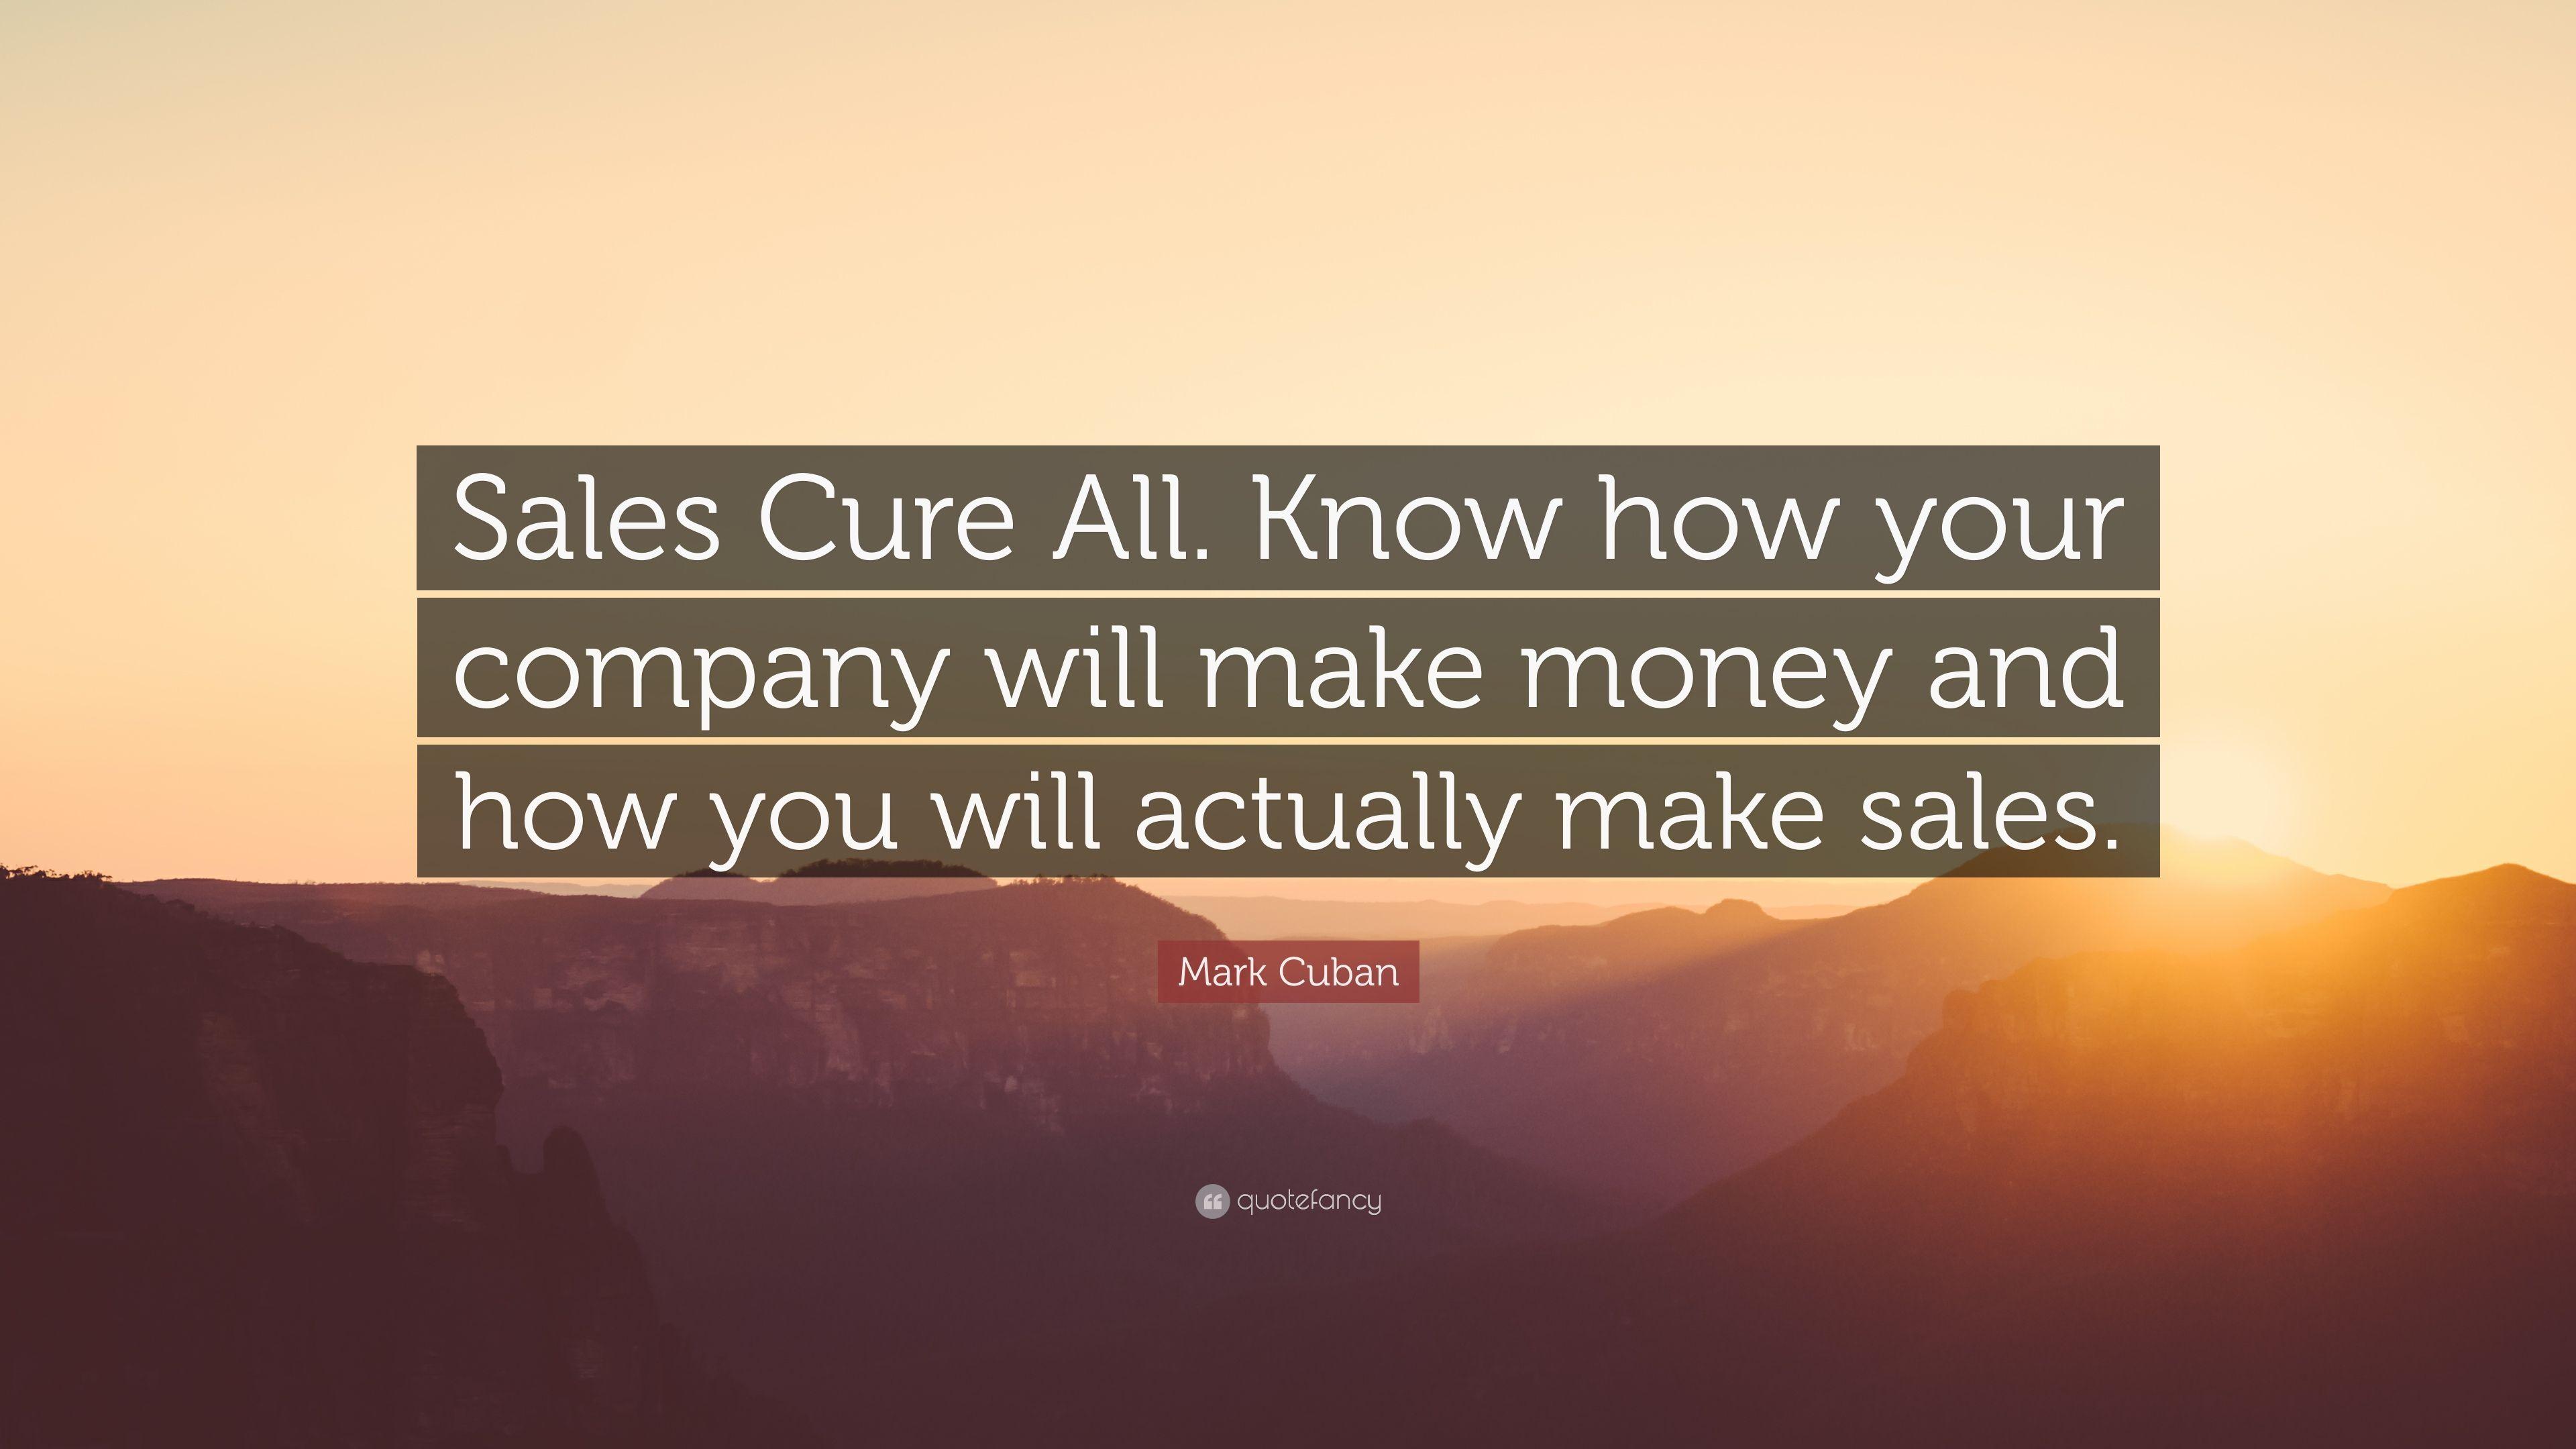 Mark Cuban Quote: “Sales Cure All. Know how your company will make